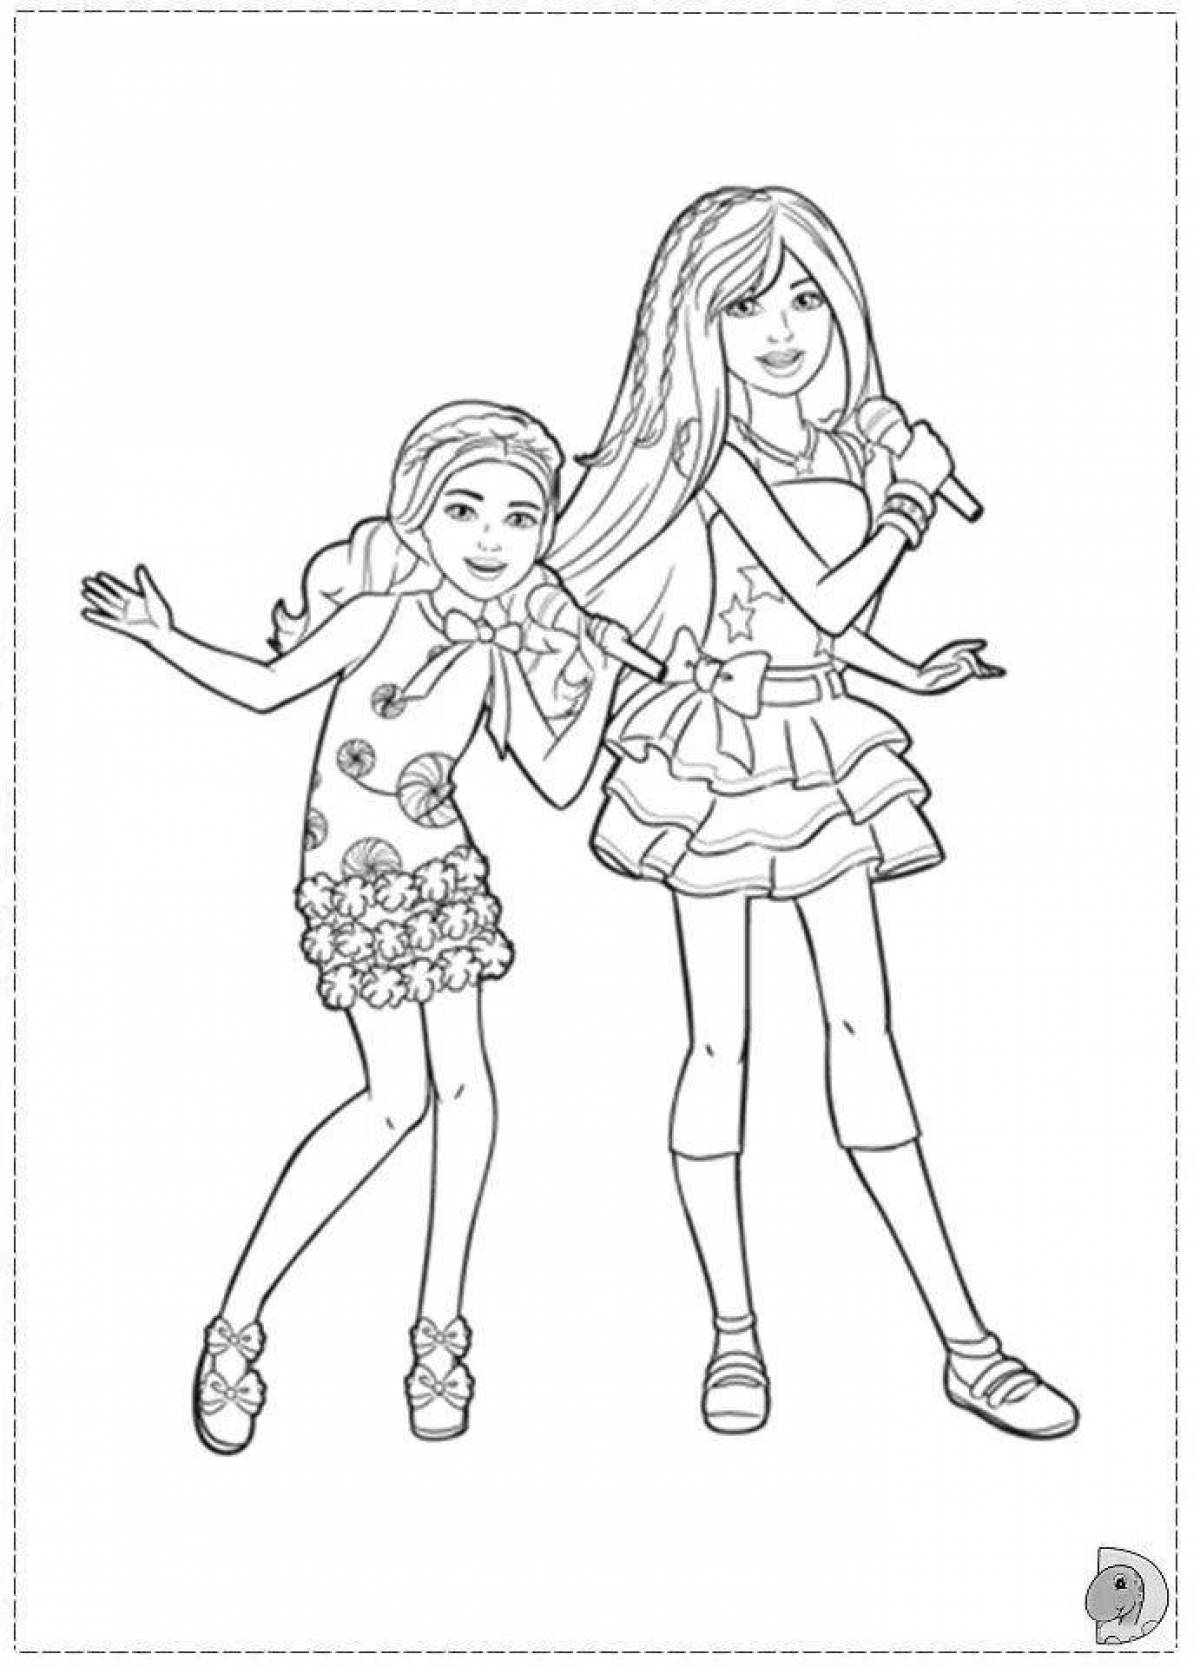 Playful chelsea coloring page